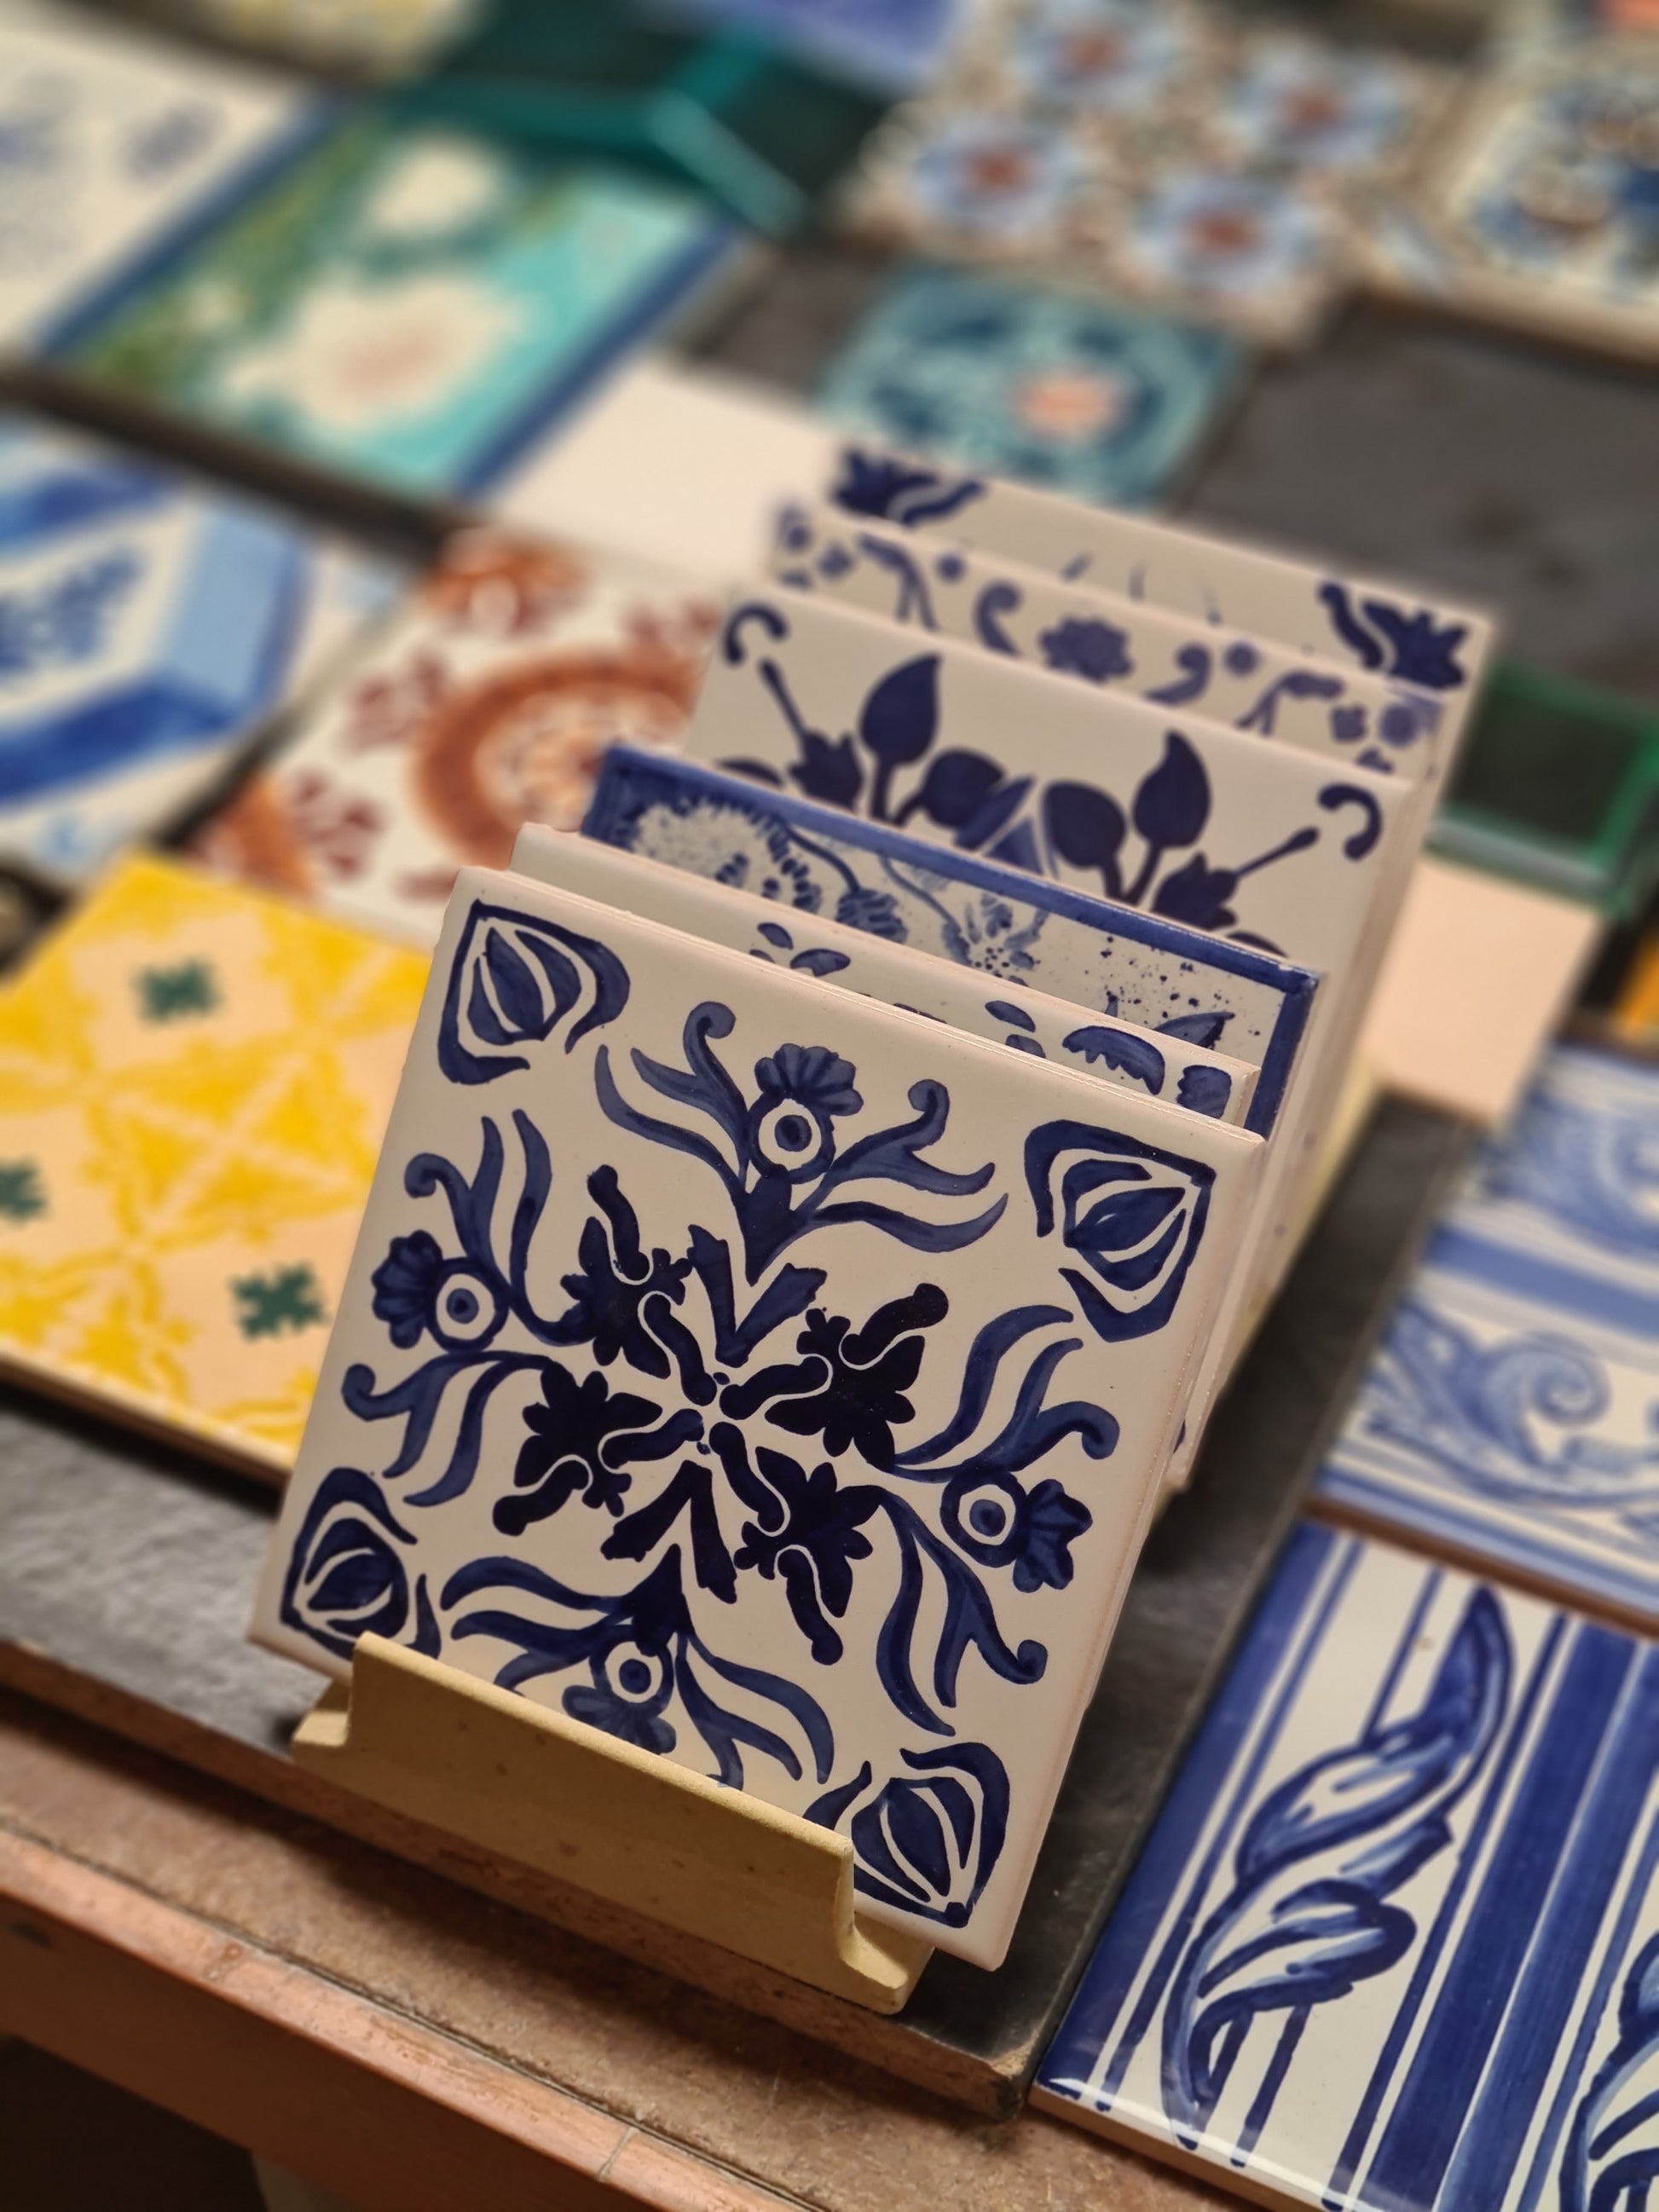 Porto Tiles and Tea Workshop with Francisco in Porto, Portugal by subcultours